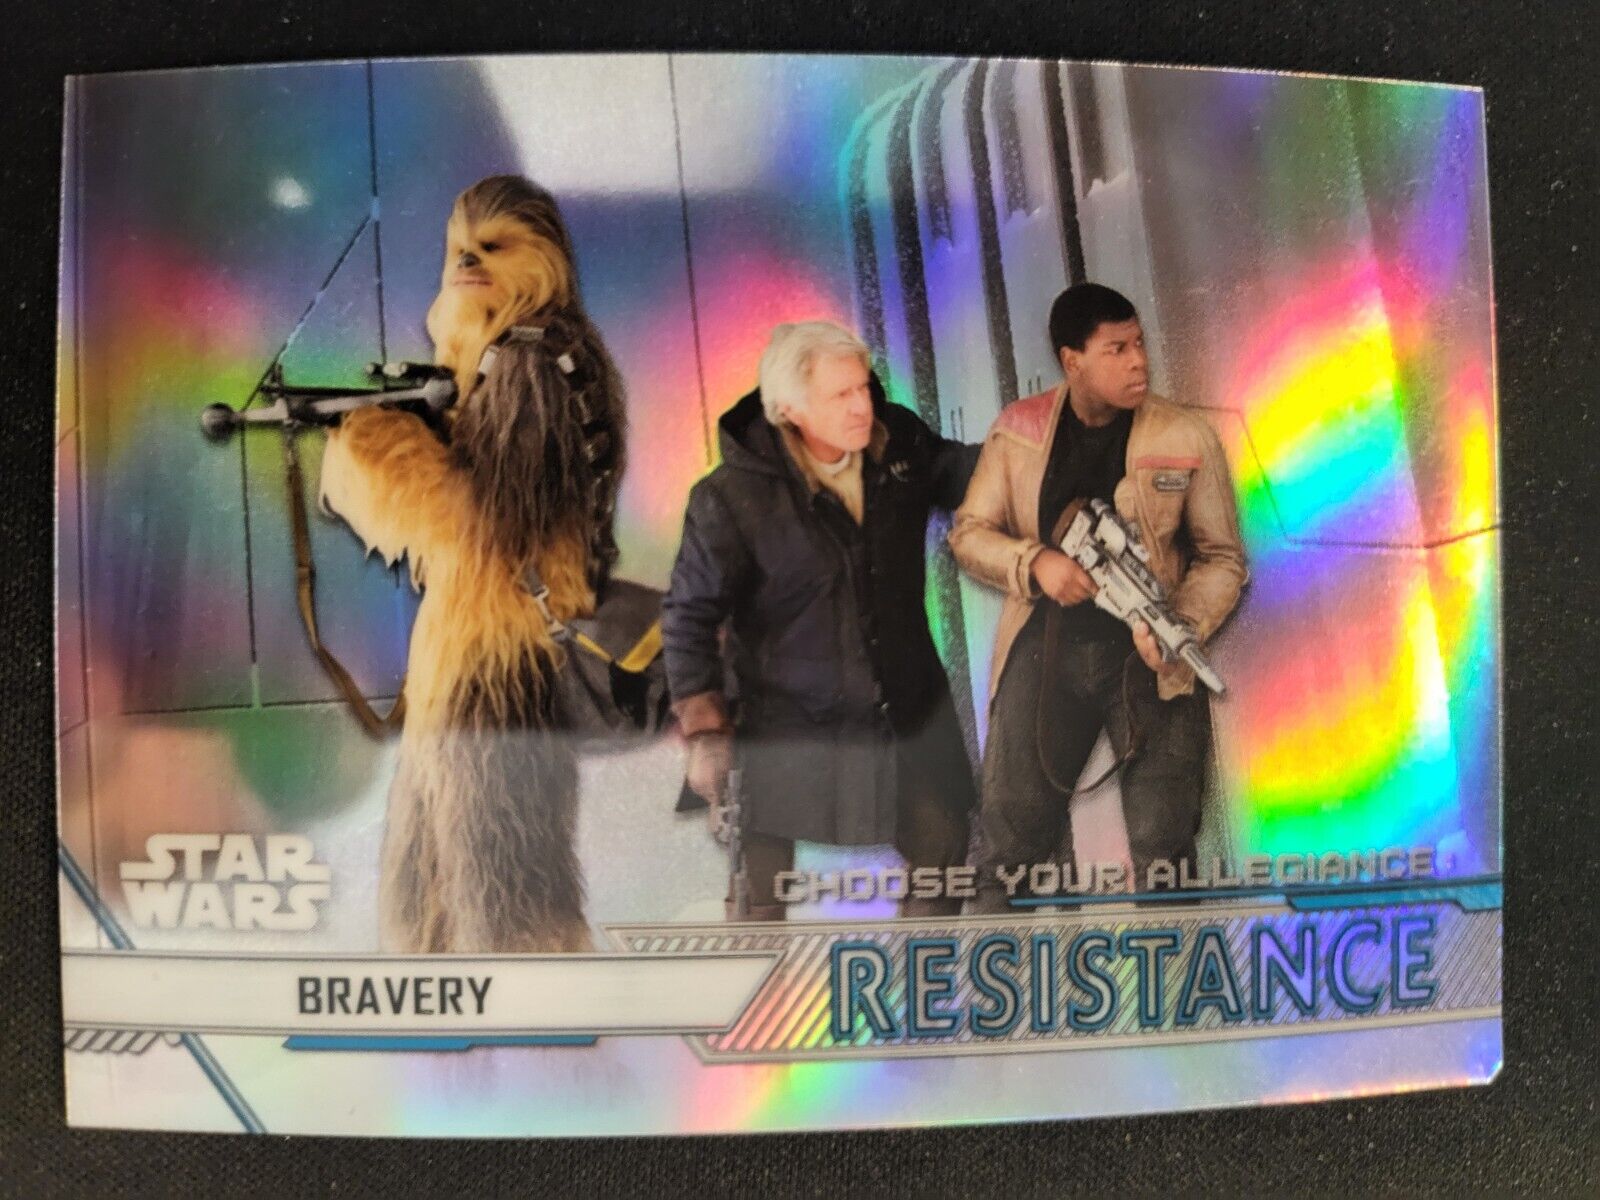 2020 Topps Chrome Star Wars Perspectives Resistence Bravery Card REFRACTOR